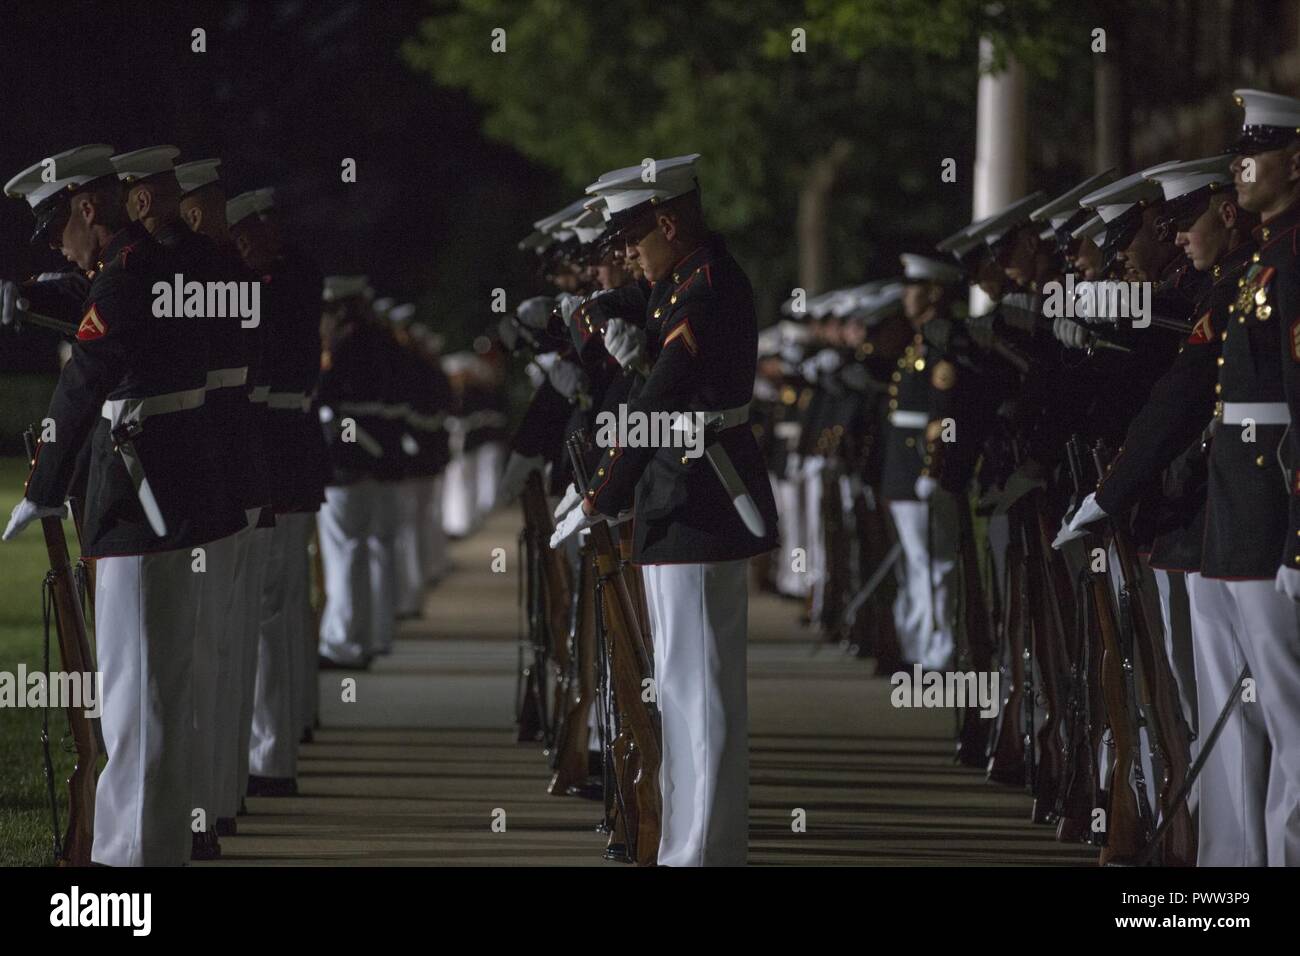 U.S. Marines with Marine Barracks Washington perform during an evening parade, Marine Barracks Washington, Washington, D.C., June 23, 2017. Evening parades are held as a means of honoring senior officials, distinguished citizens and supporters of the Marine Corps. Stock Photo